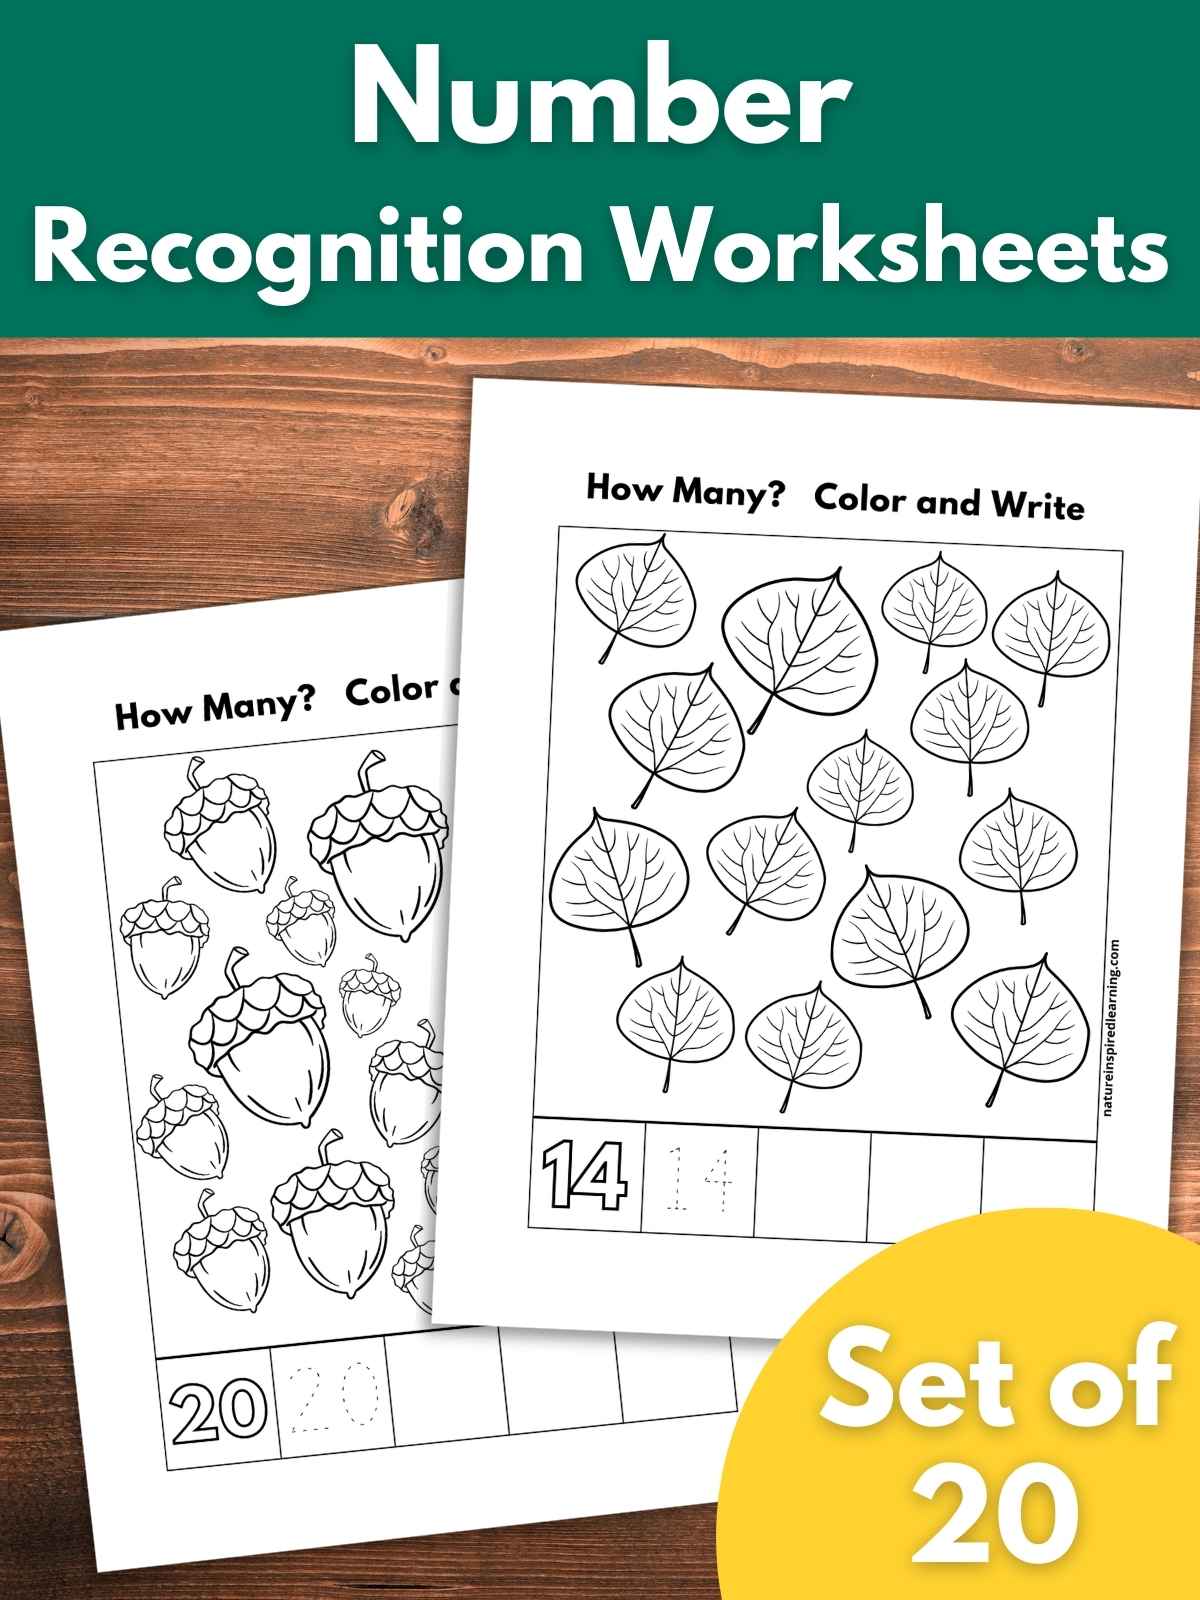 two count, color, and write number worksheets overlapping on a wooden background. One sheet has 14 black and white leaves with boxes below and the other has twenty black and white acorns with boxes below. Text overlay in white on a green background across the top and a bright yellow circle bottom right with white text overlay.